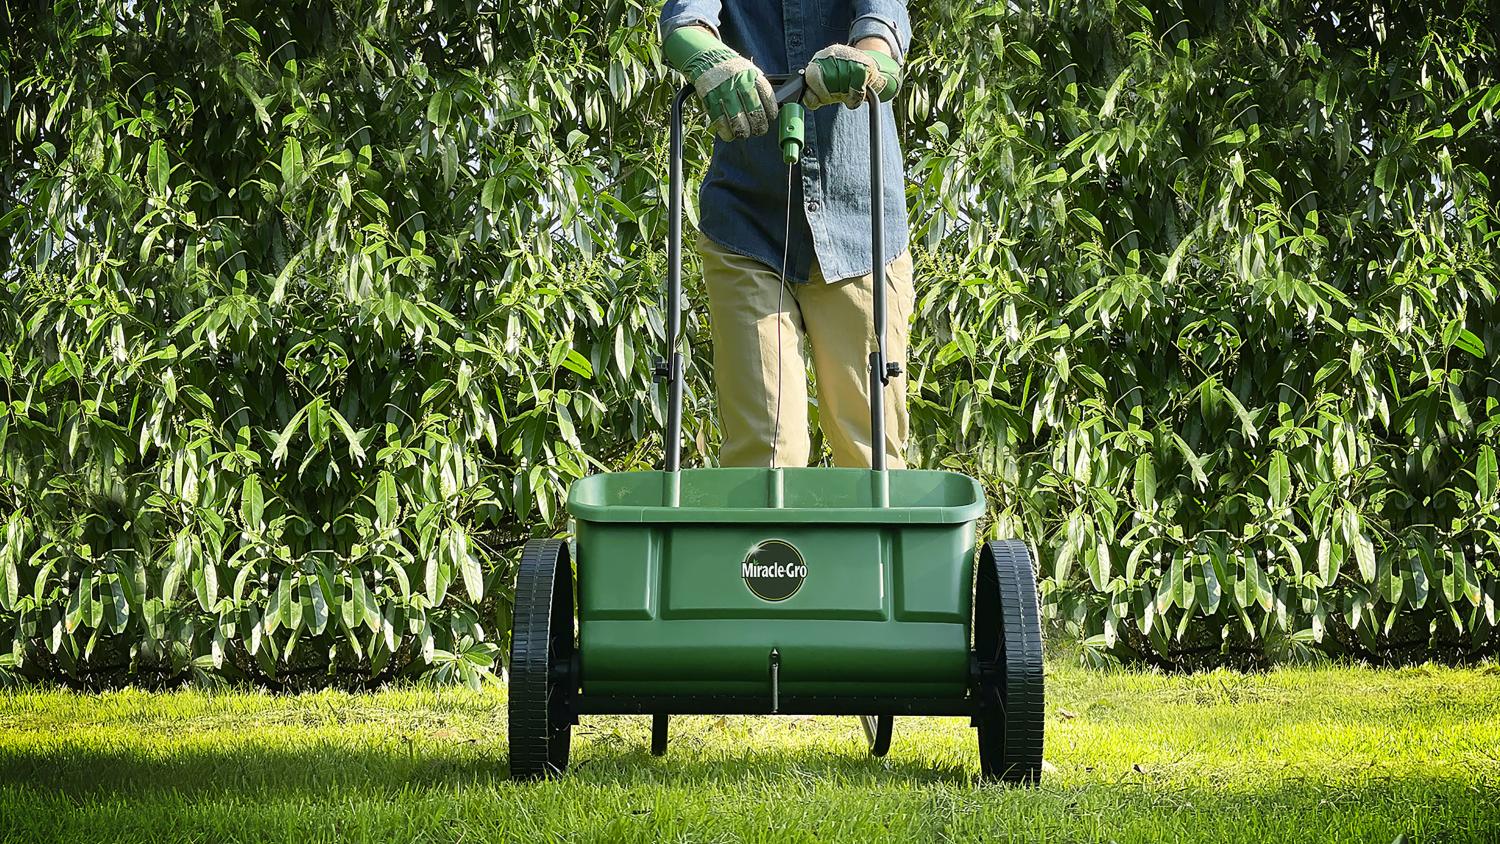 Gardener sowing grass seed on lawn with a lawn spreader.